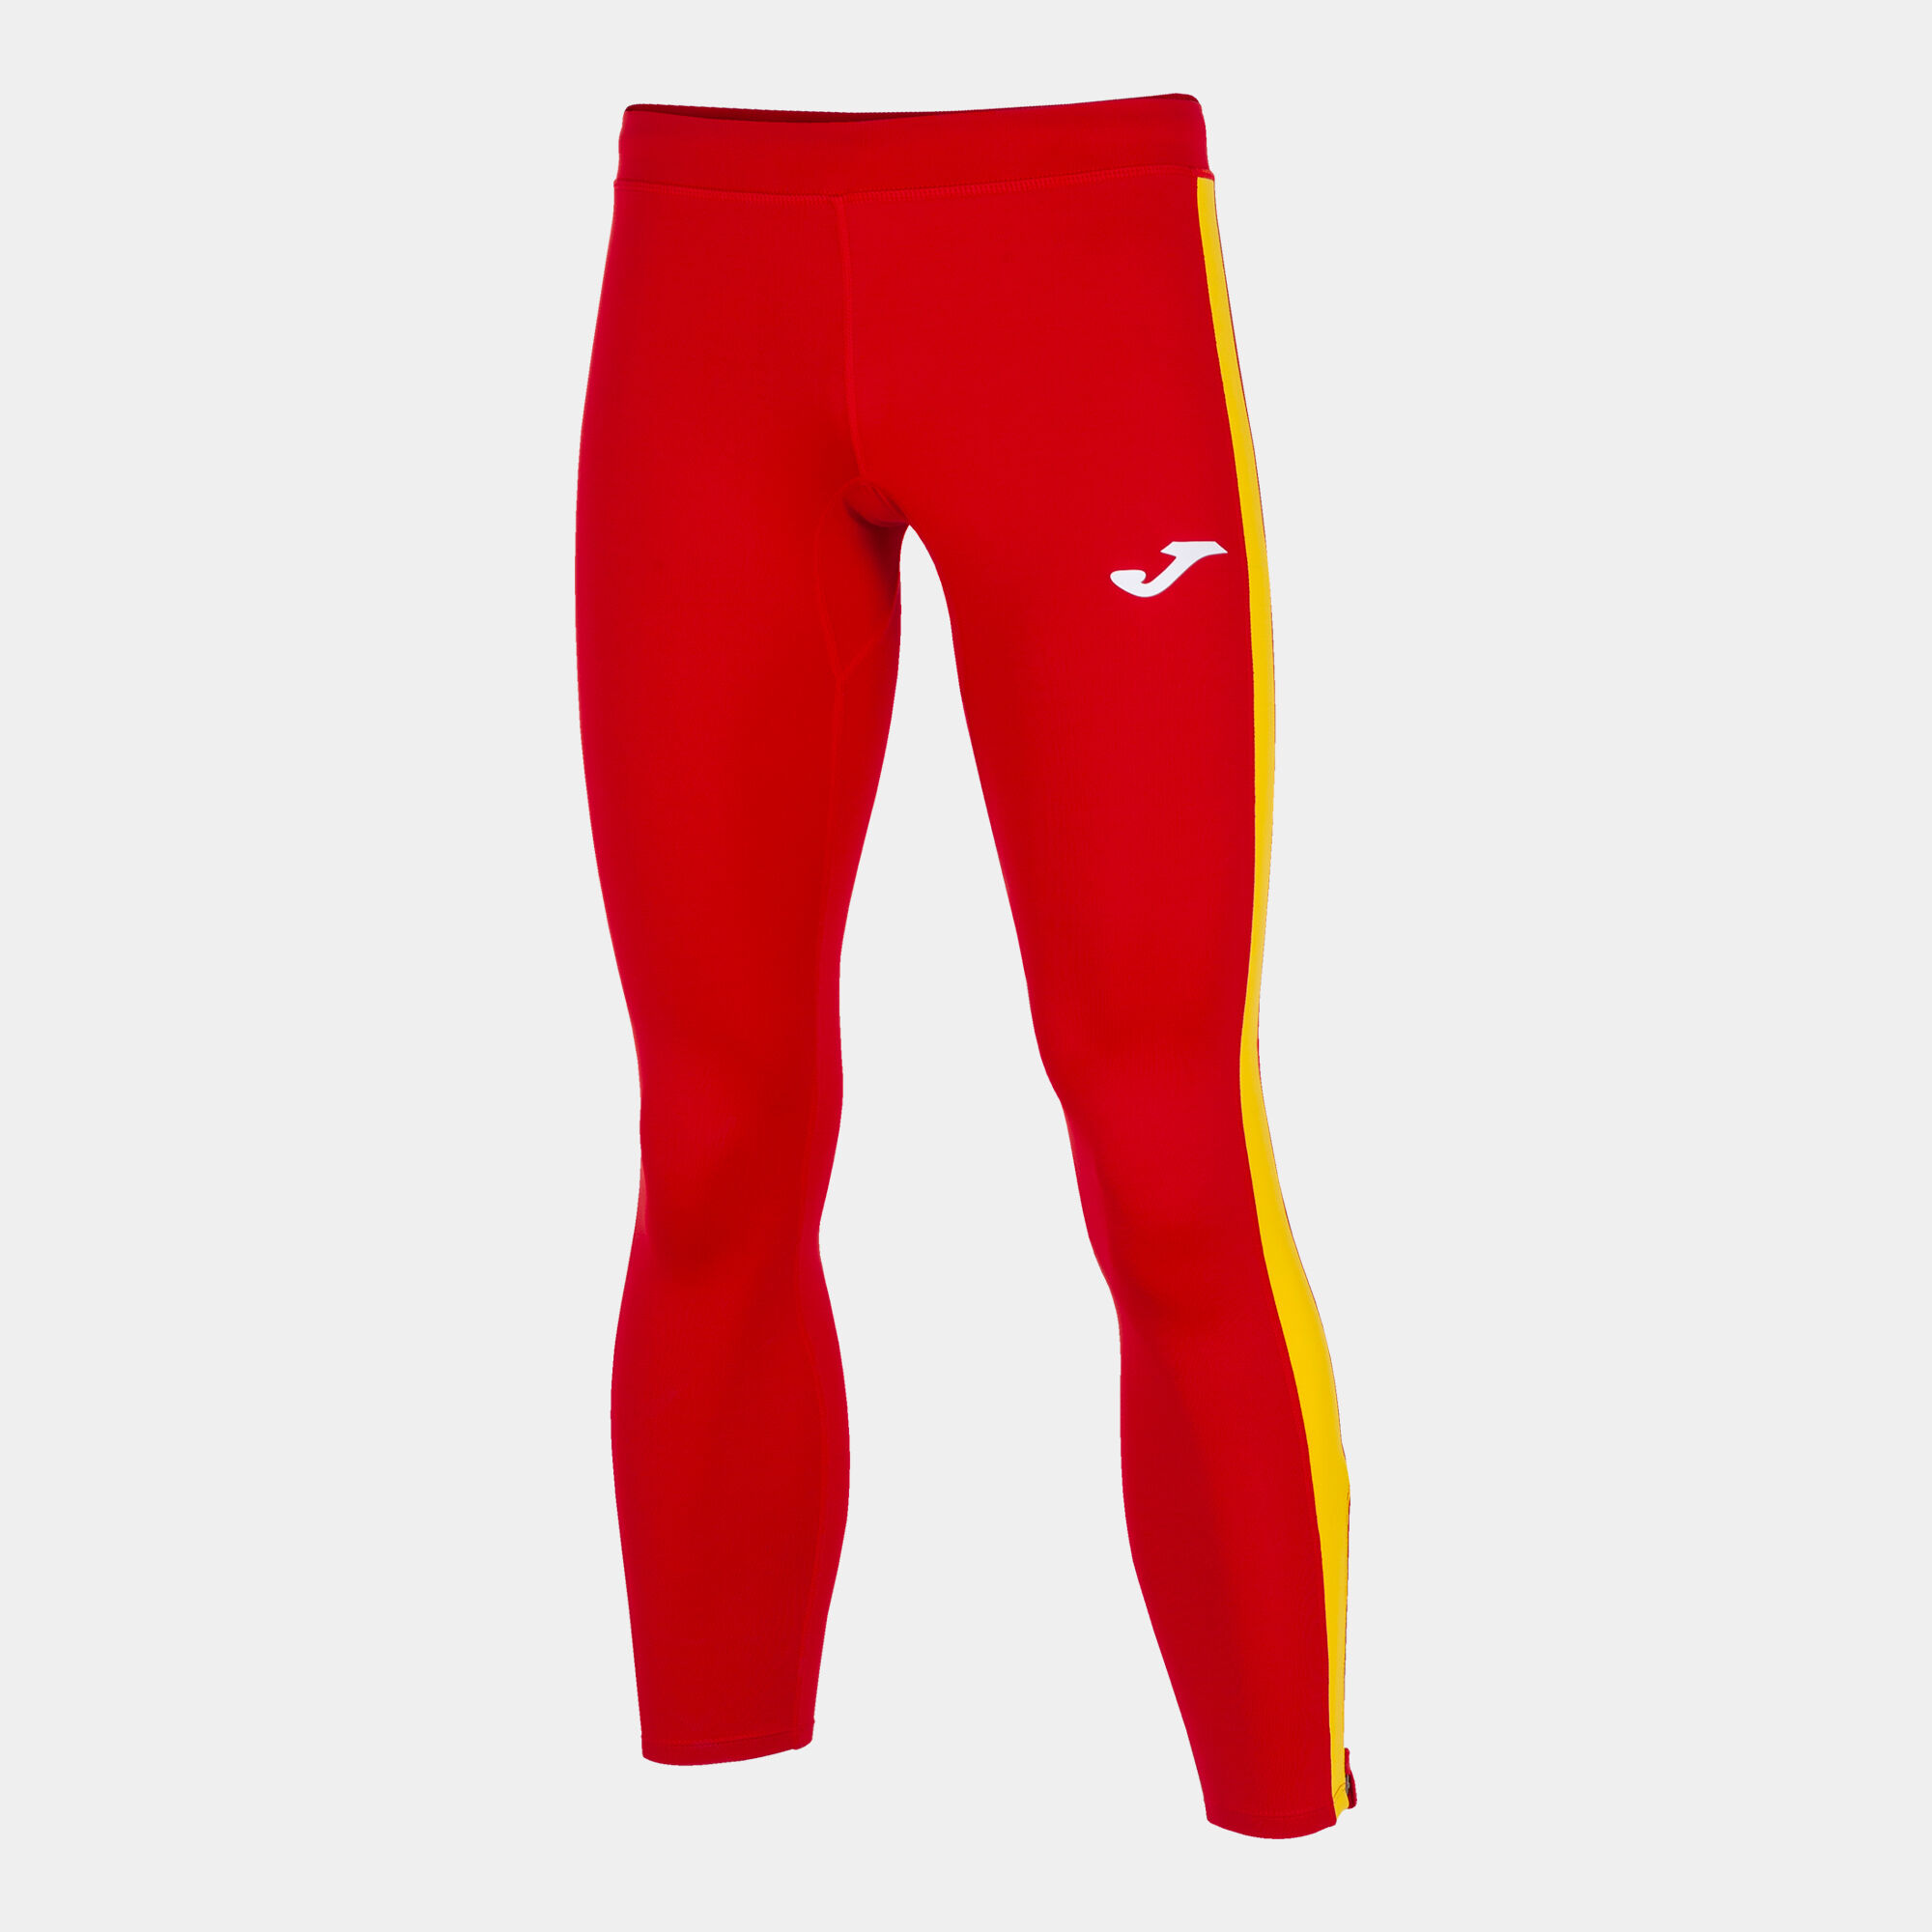 LONG TIGHTS UNISEX ELITE VII RED YELLOW